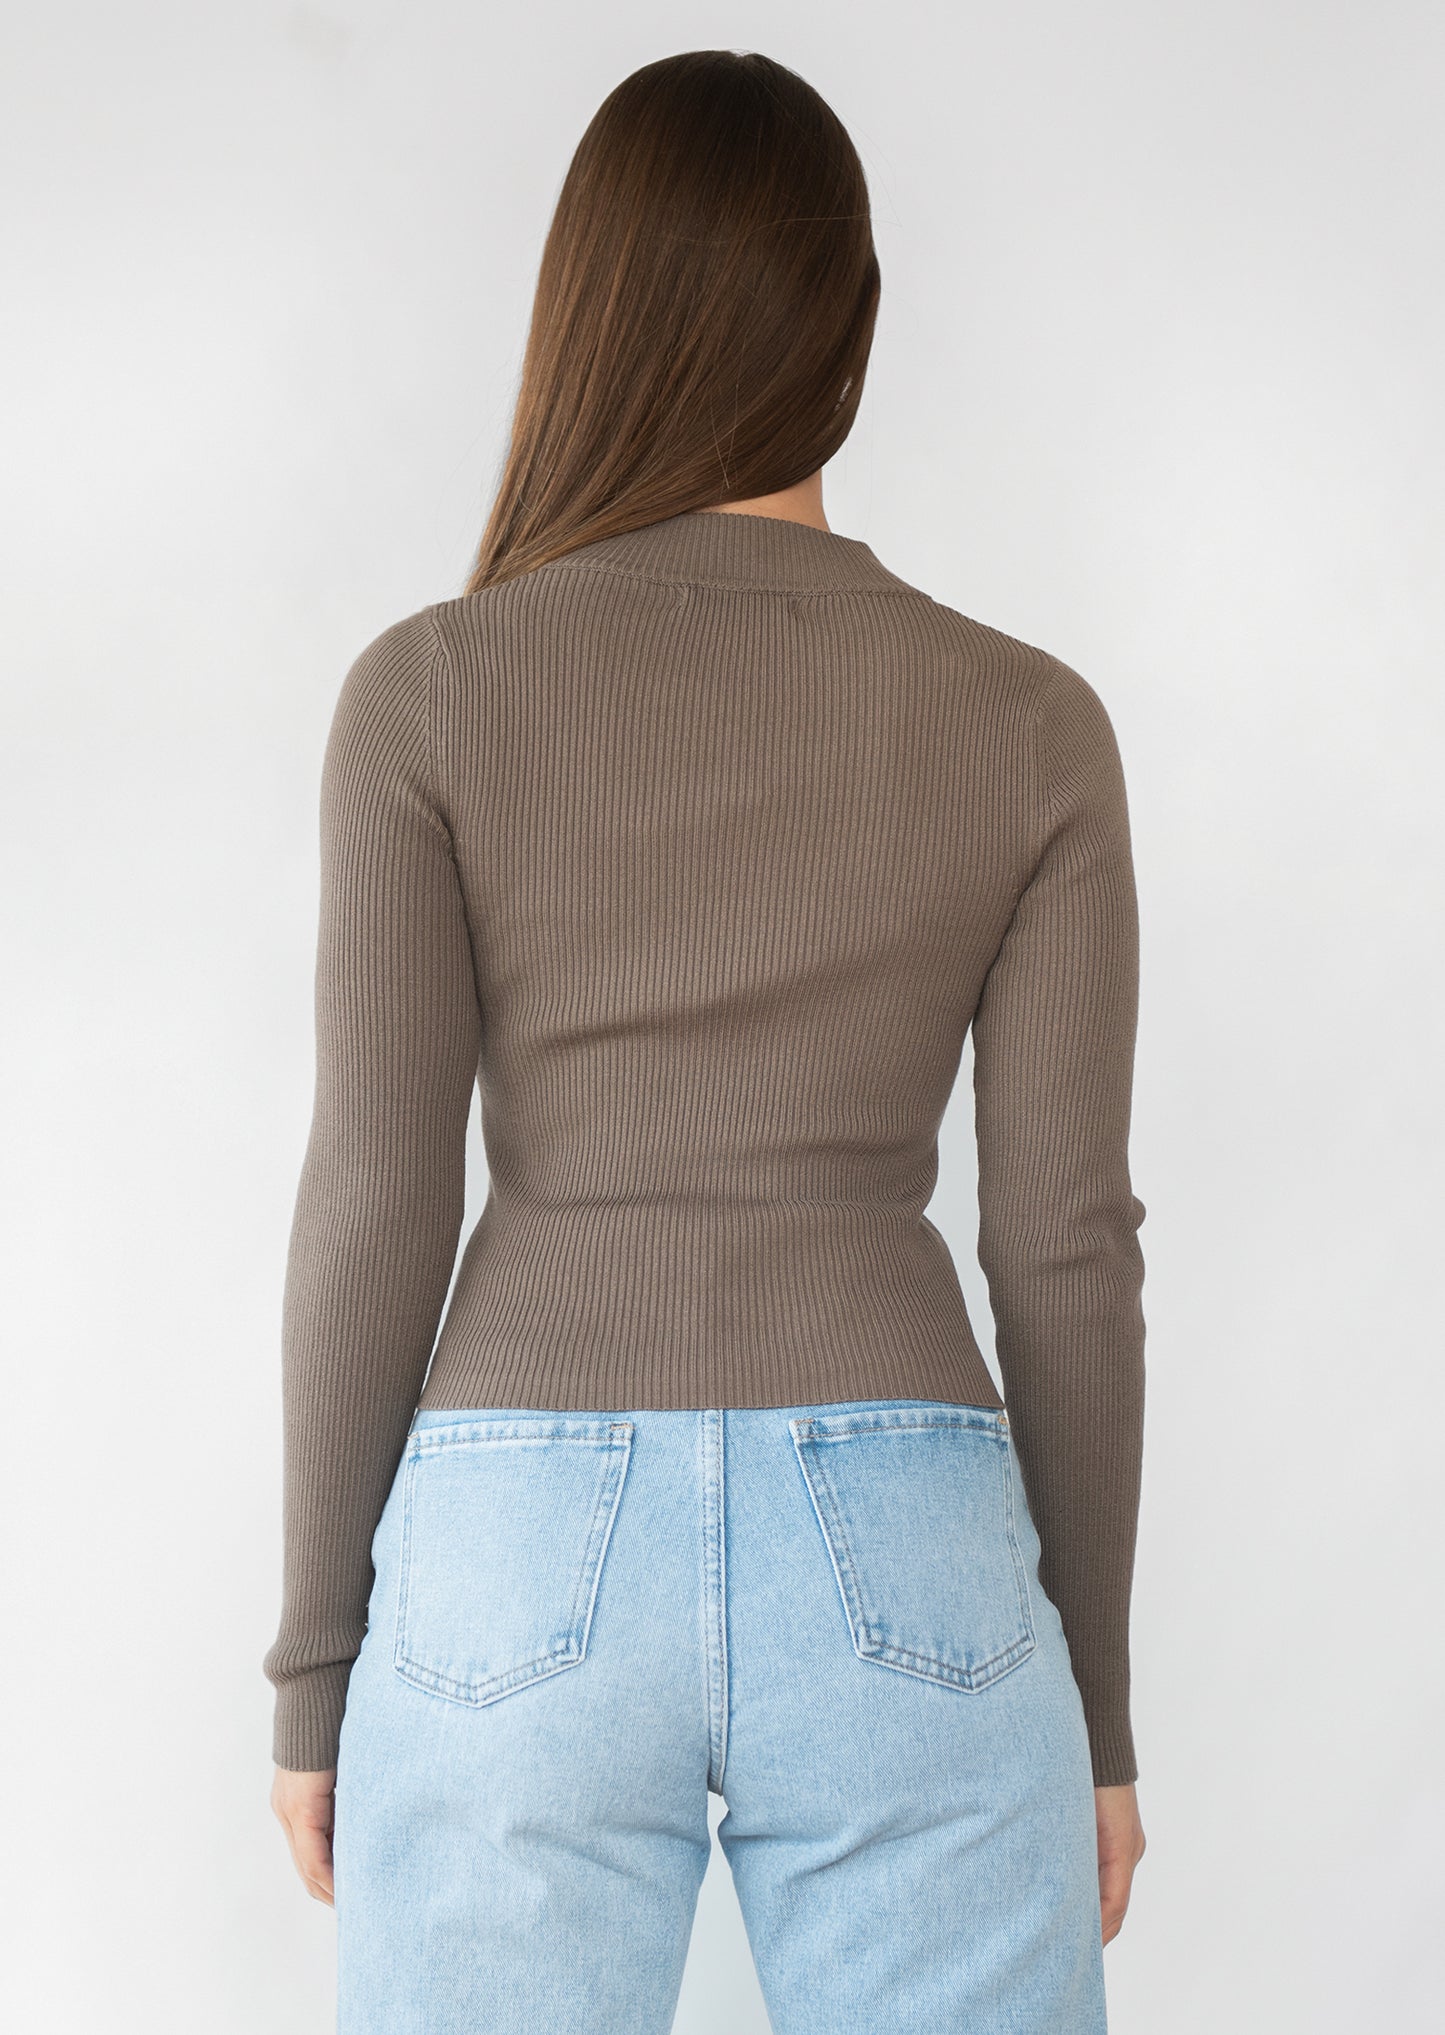 Ribbed half zip jumper in taupe